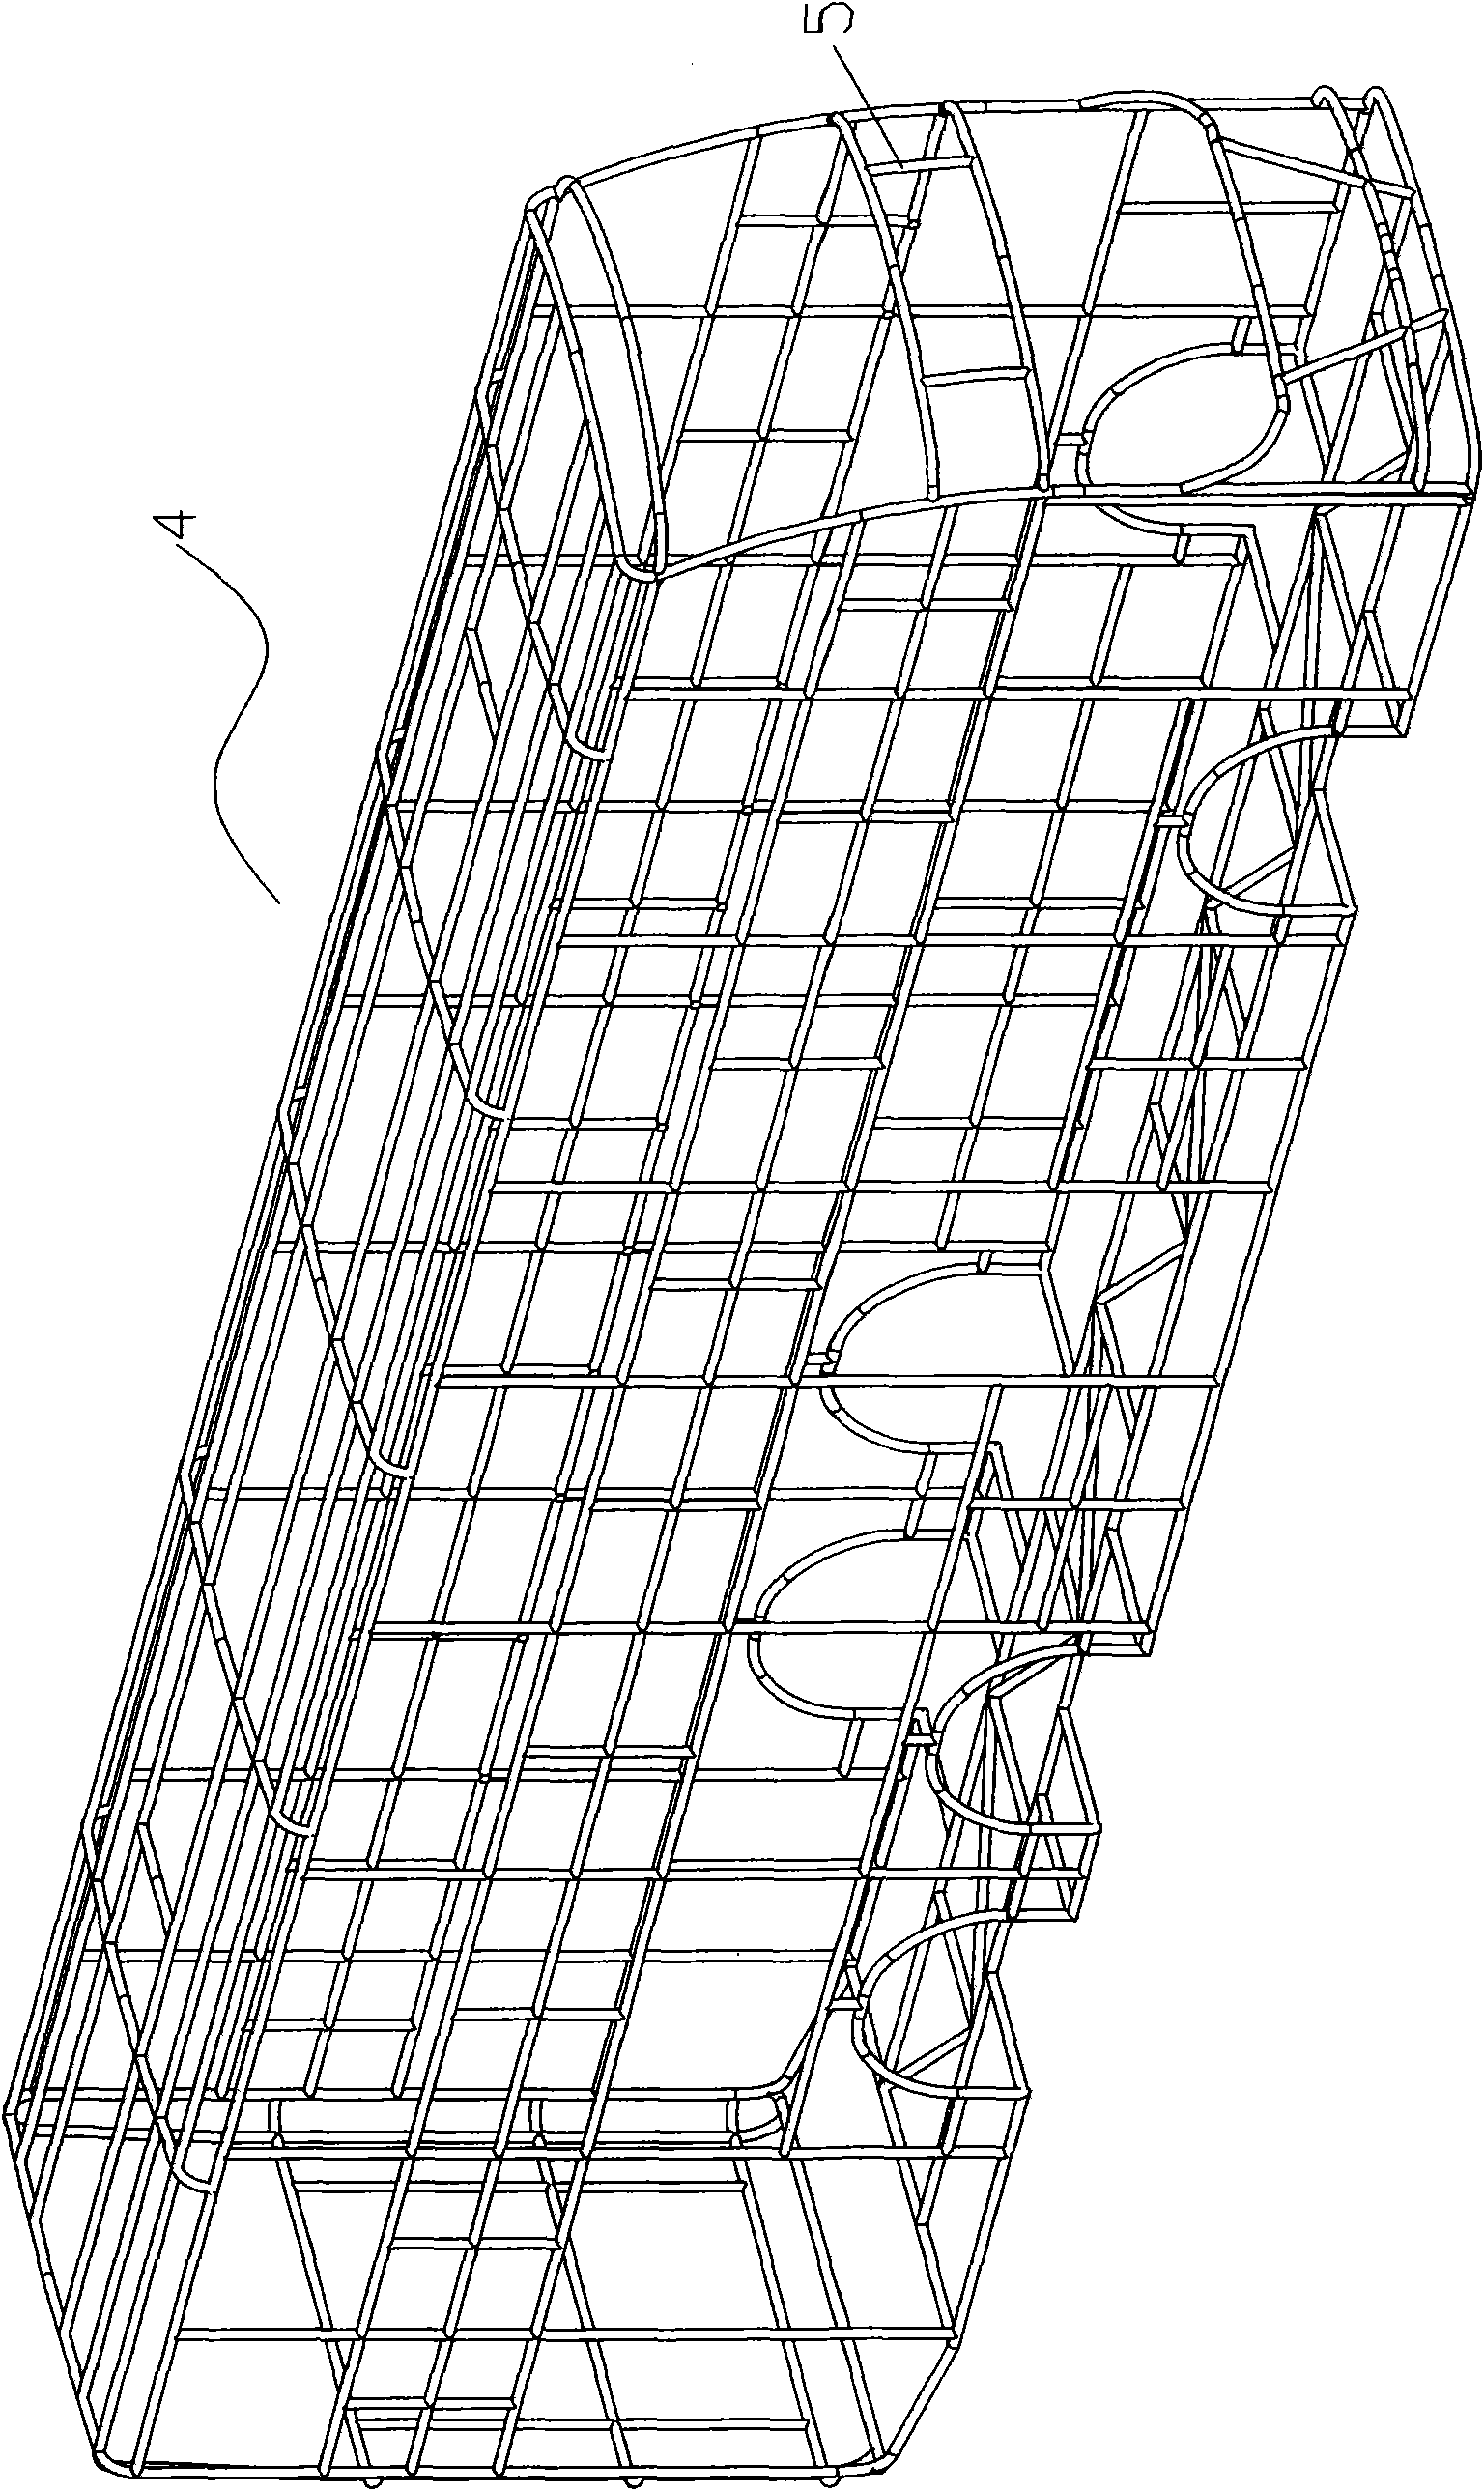 Lightweight coach body structure and section thereof